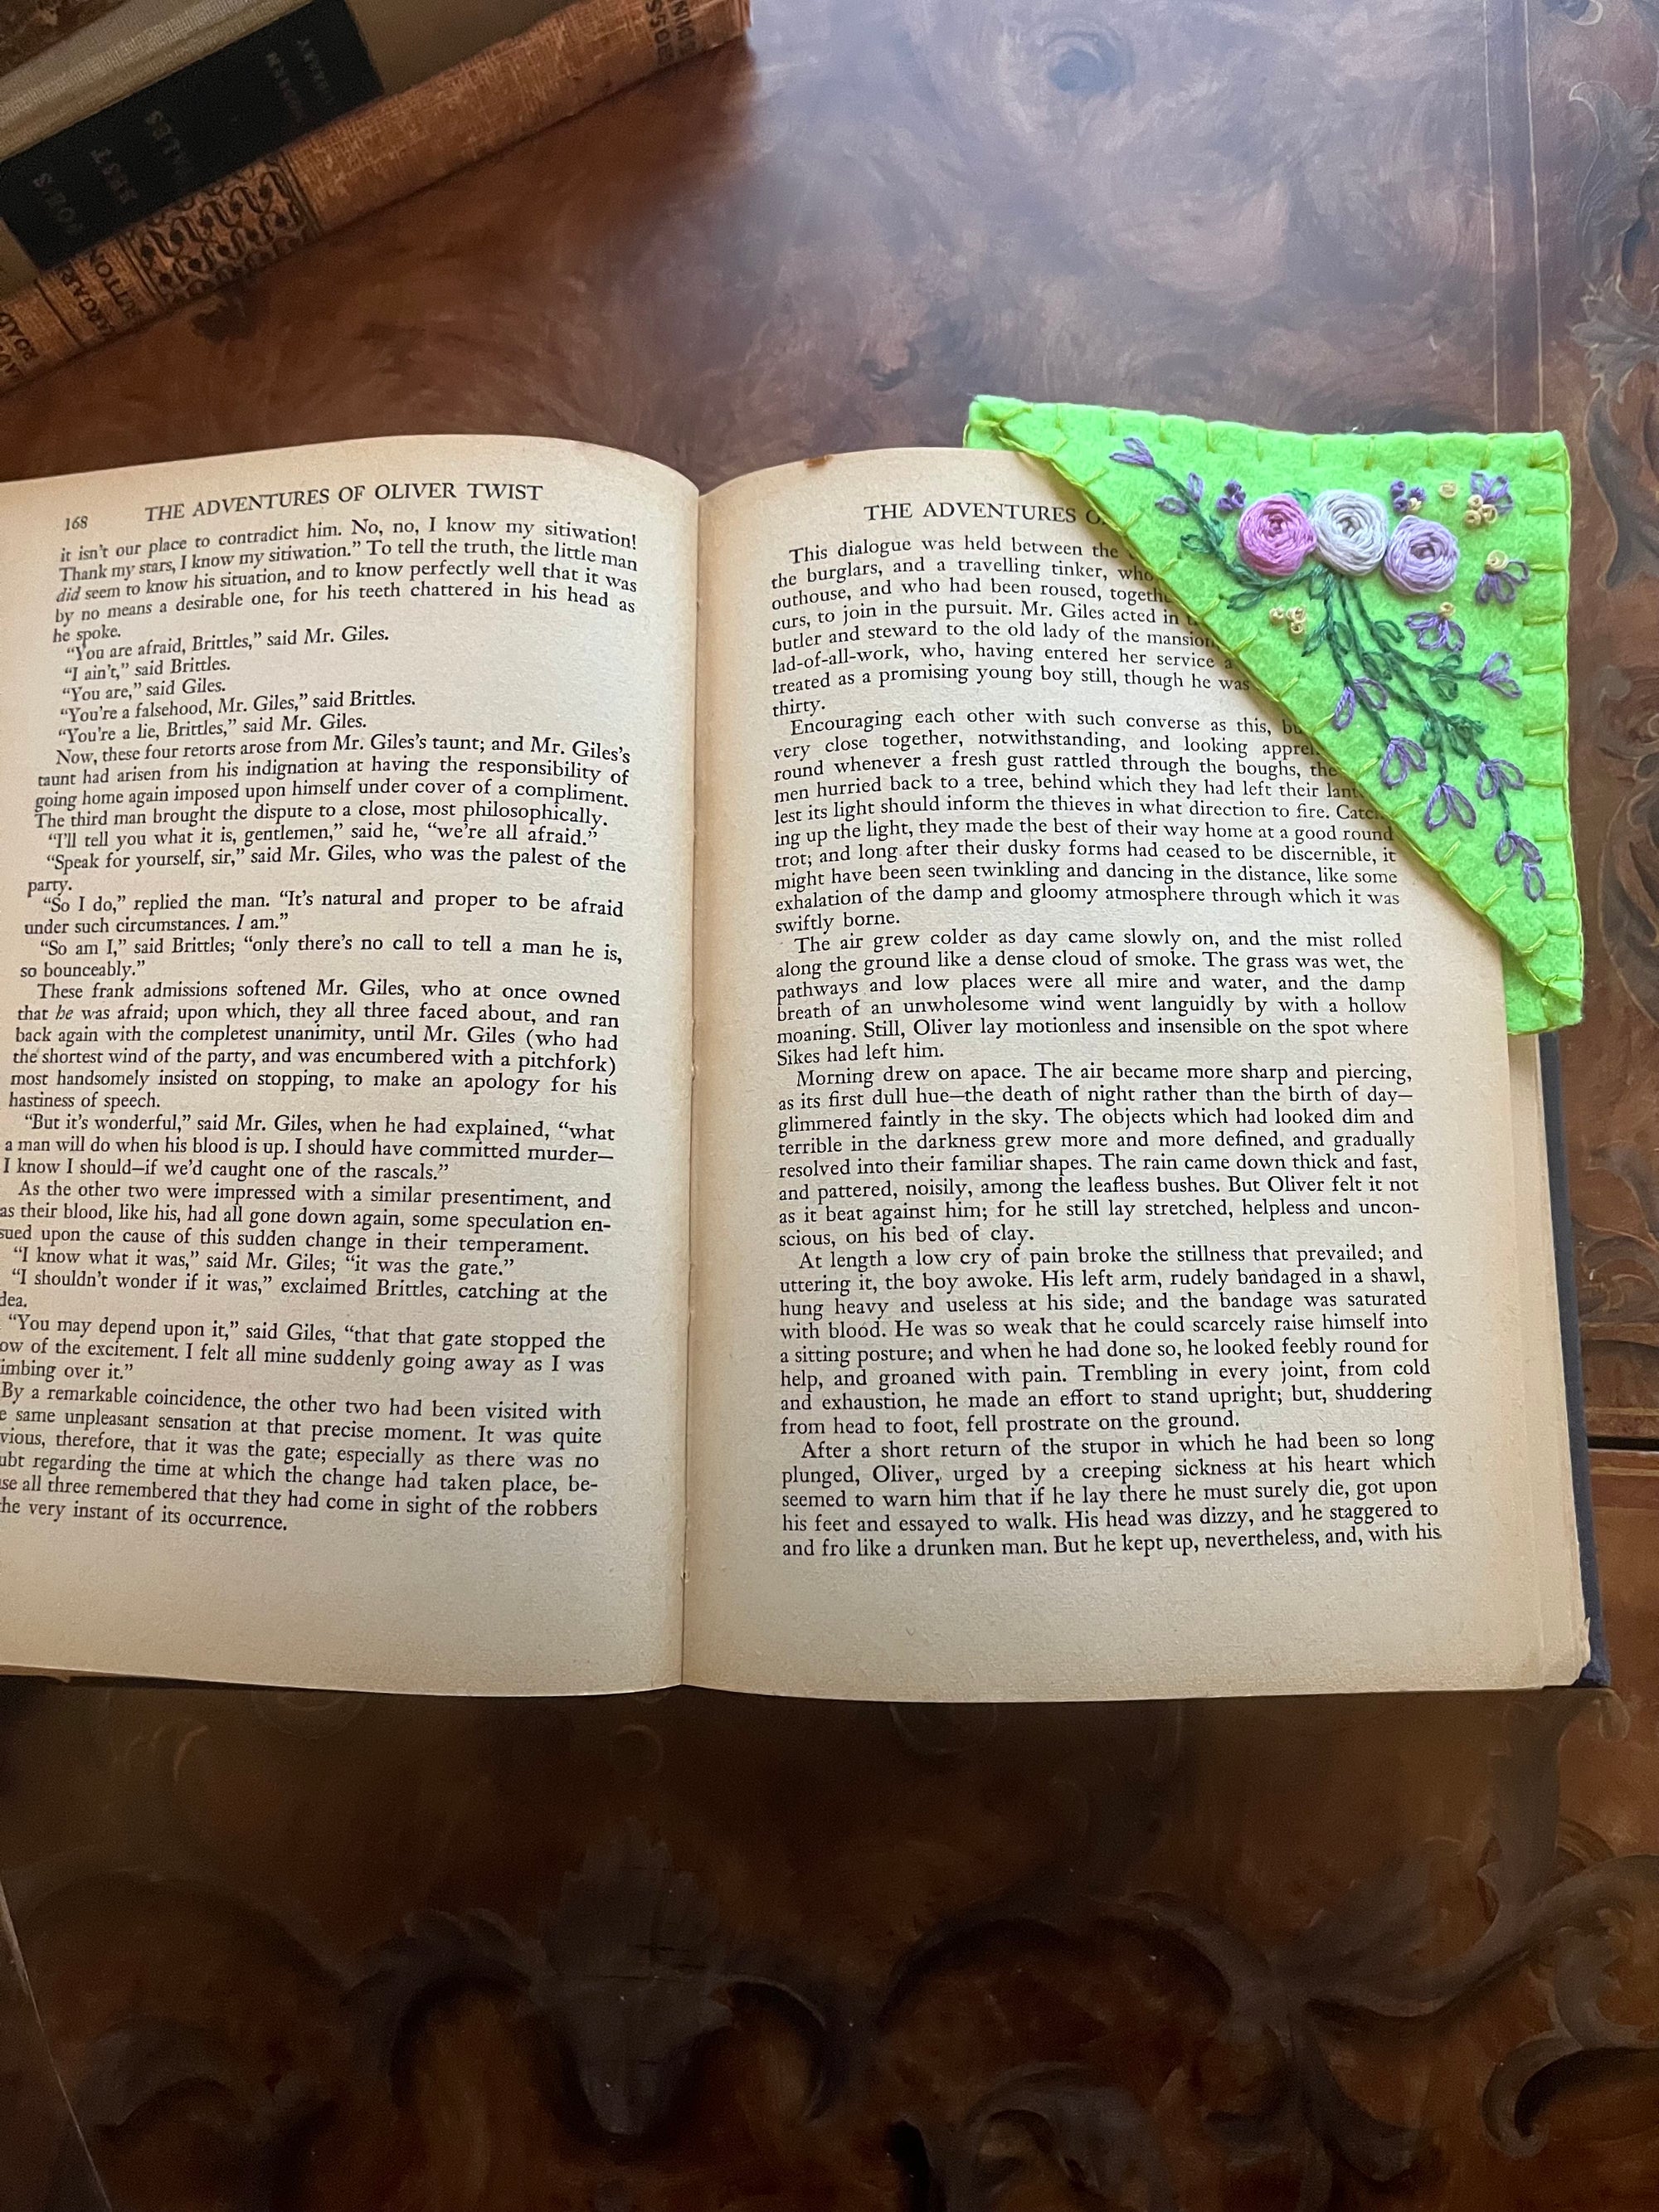 Embroidered Bookmark